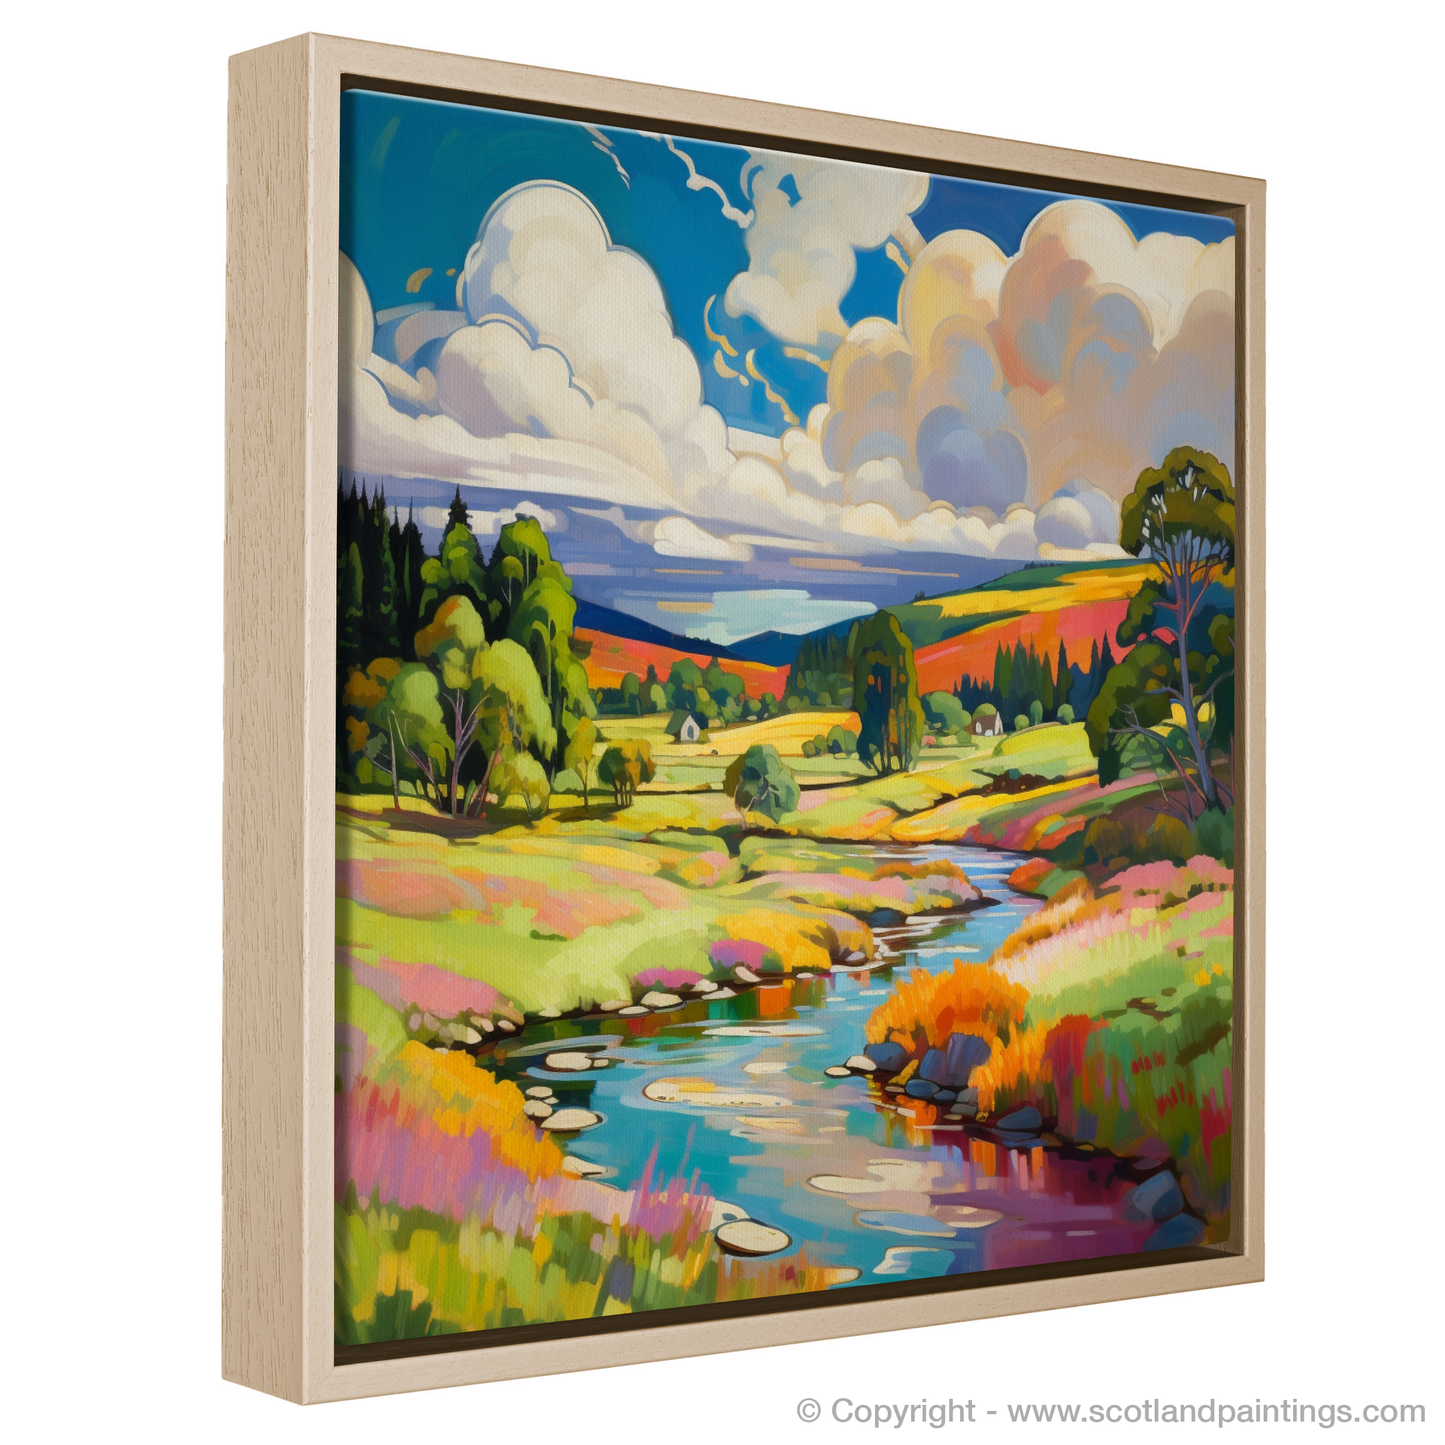 Painting and Art Print of Glen Tanar, Aberdeenshire in summer entitled "Aberdeenshire's Summer Symphony in Fauvist Hues".